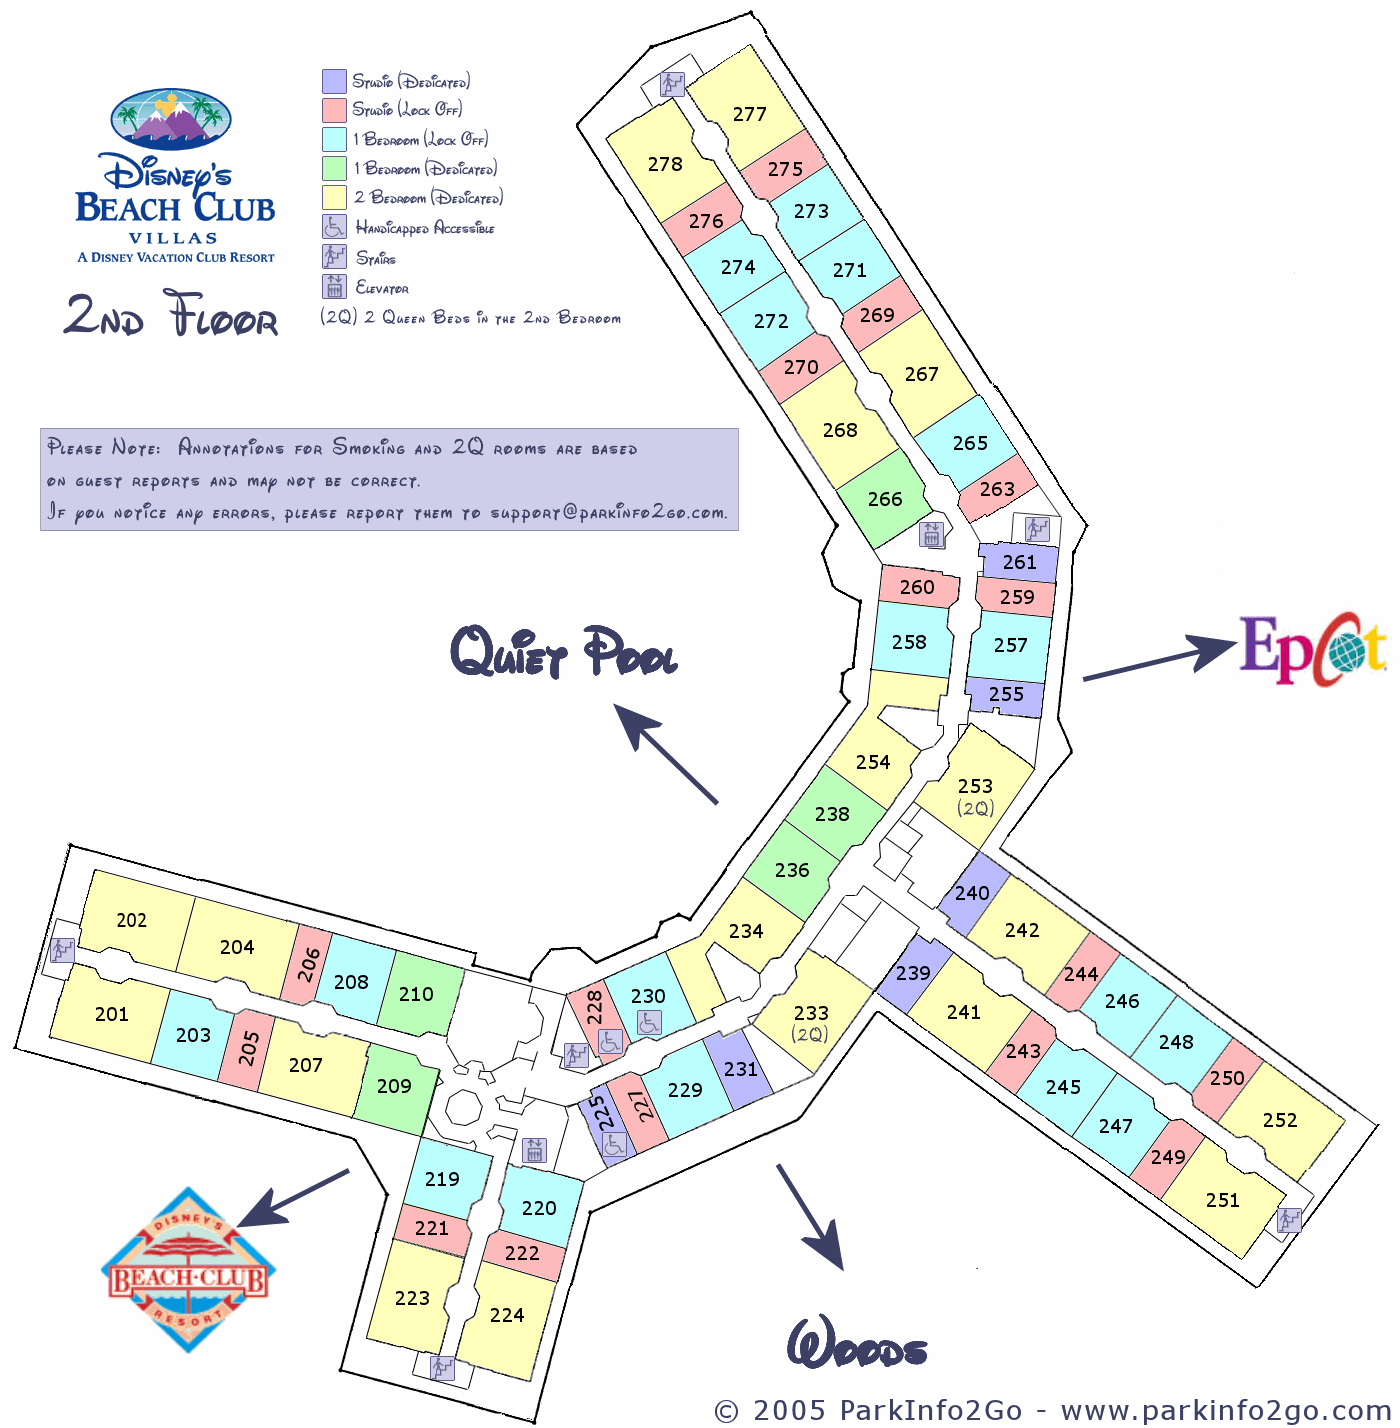 Room locations with #s at Beach Club villas | The DIS Disney Discussion